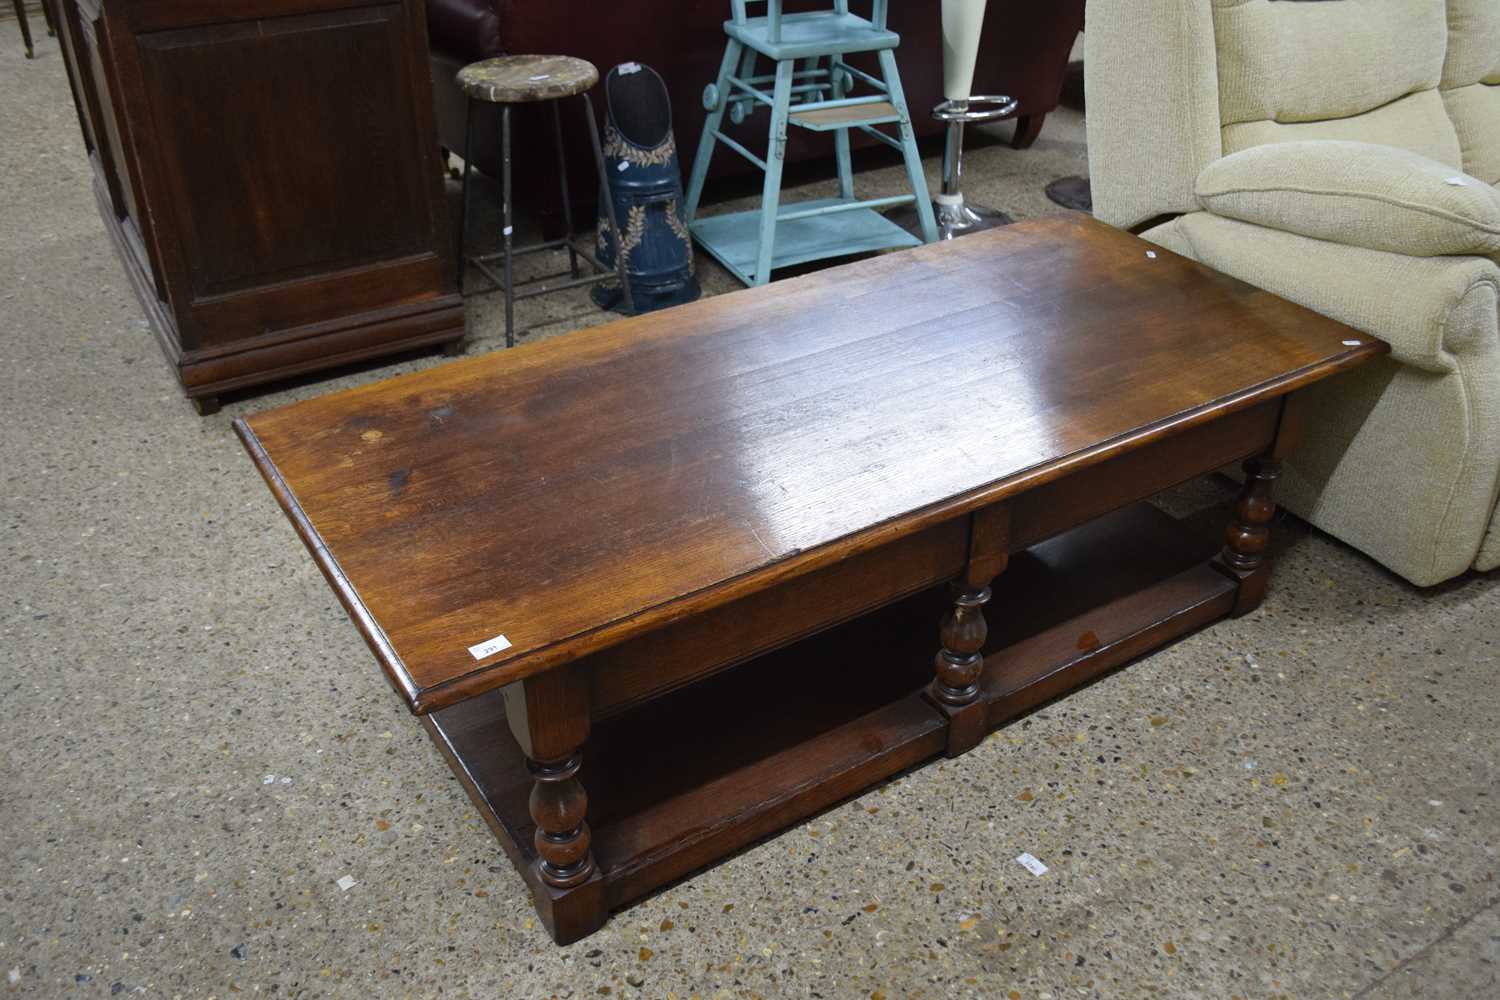 Good quality reproduction oak coffee table 152cm wide